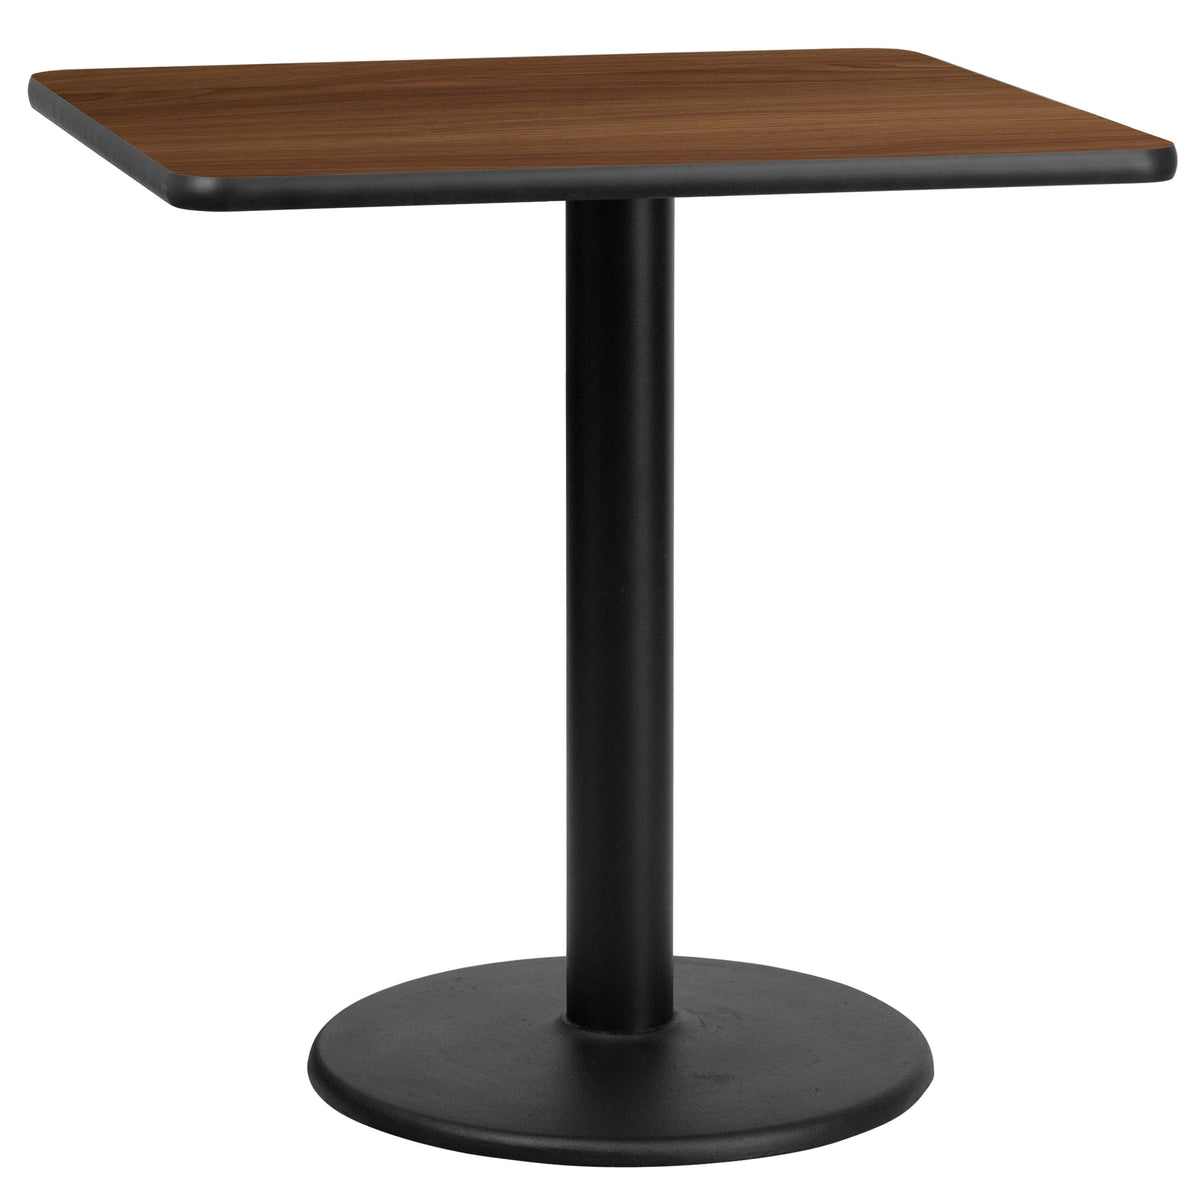 Walnut |#| 30inch Square Walnut Laminate Table Top with 18inch Round Table Height Base